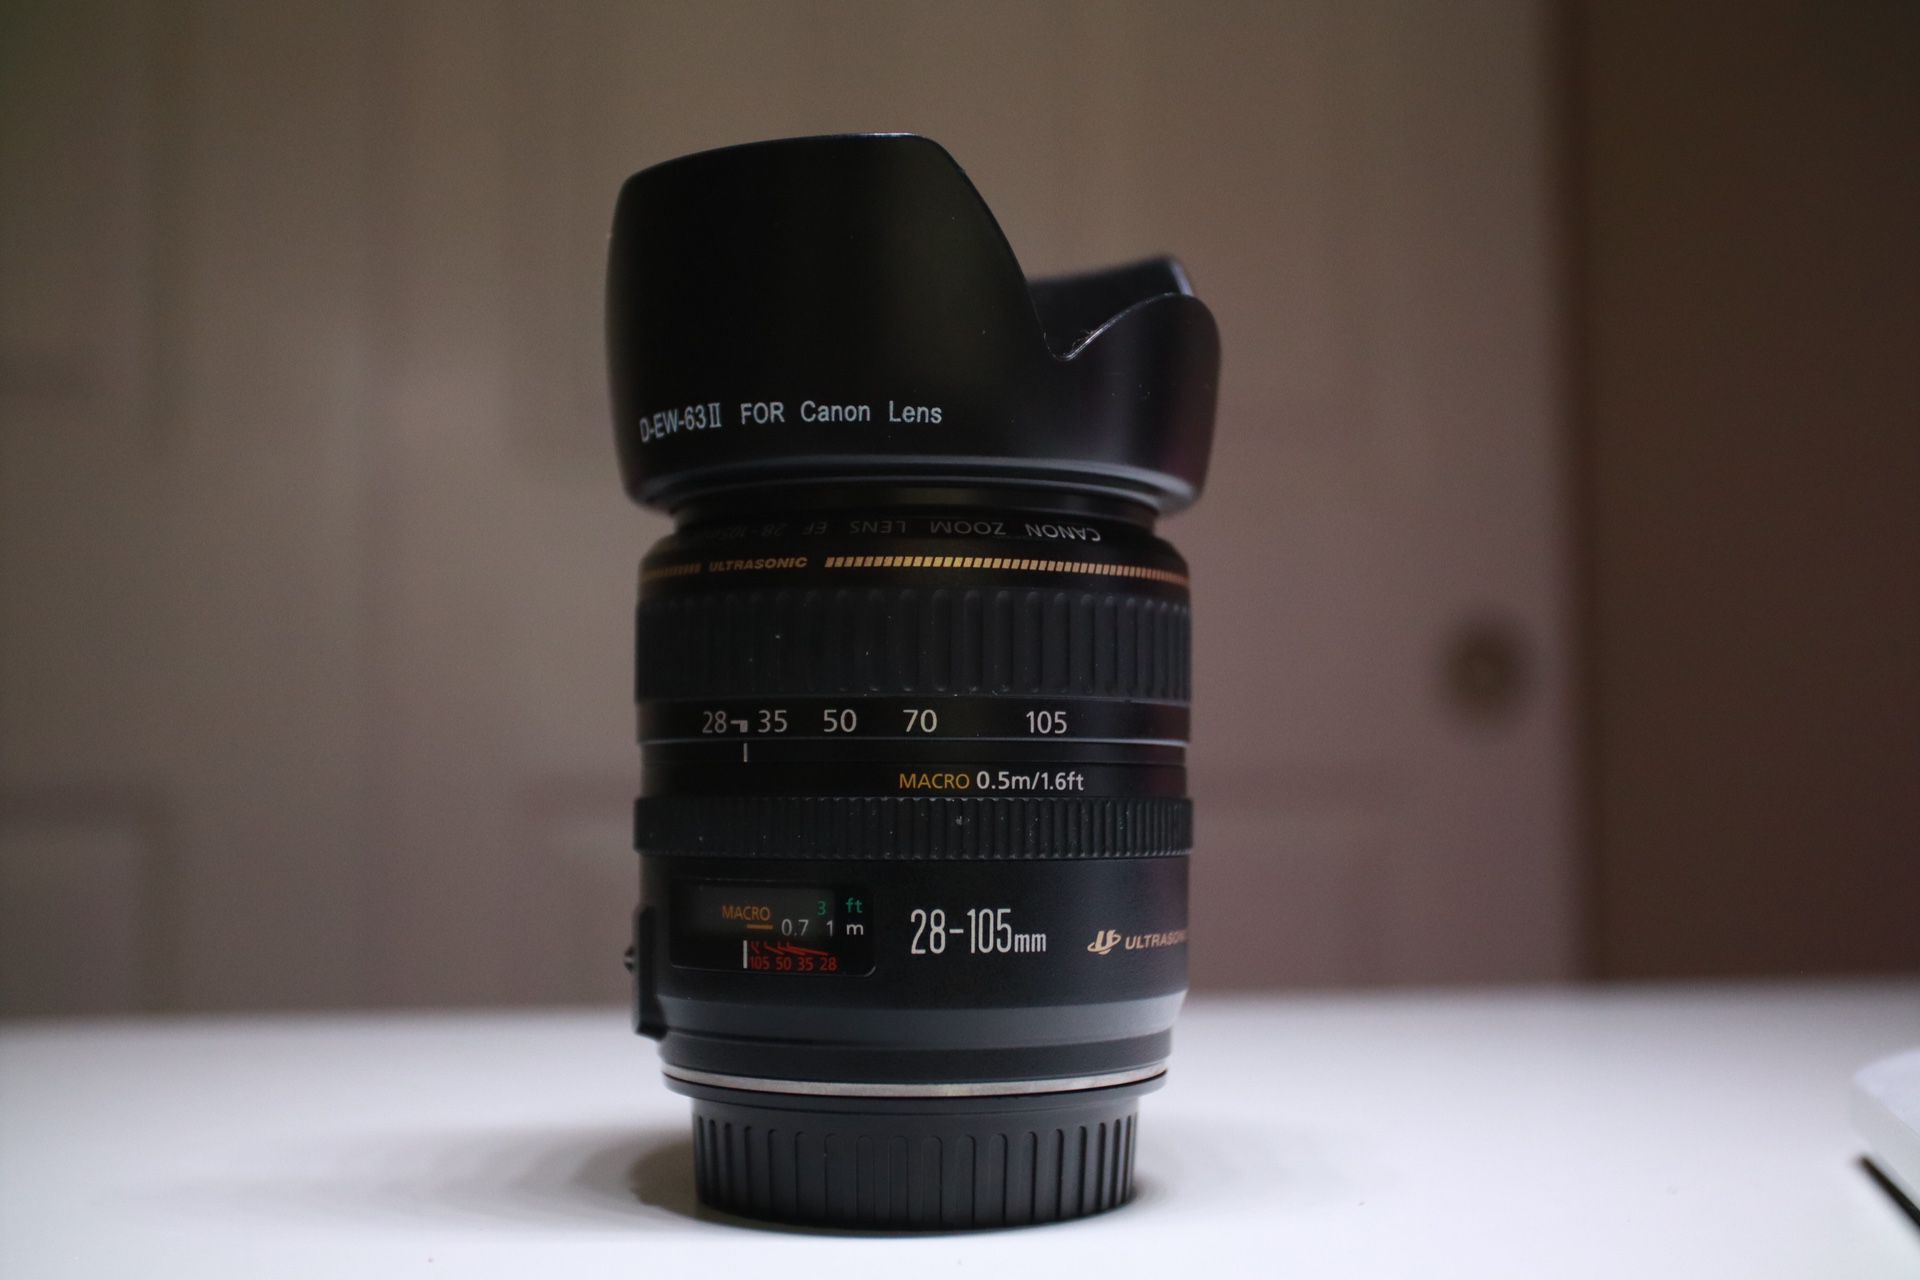 Canon 28-105mm F 1:3.5-4.5 II USM Zoom Lens with Lens Hood